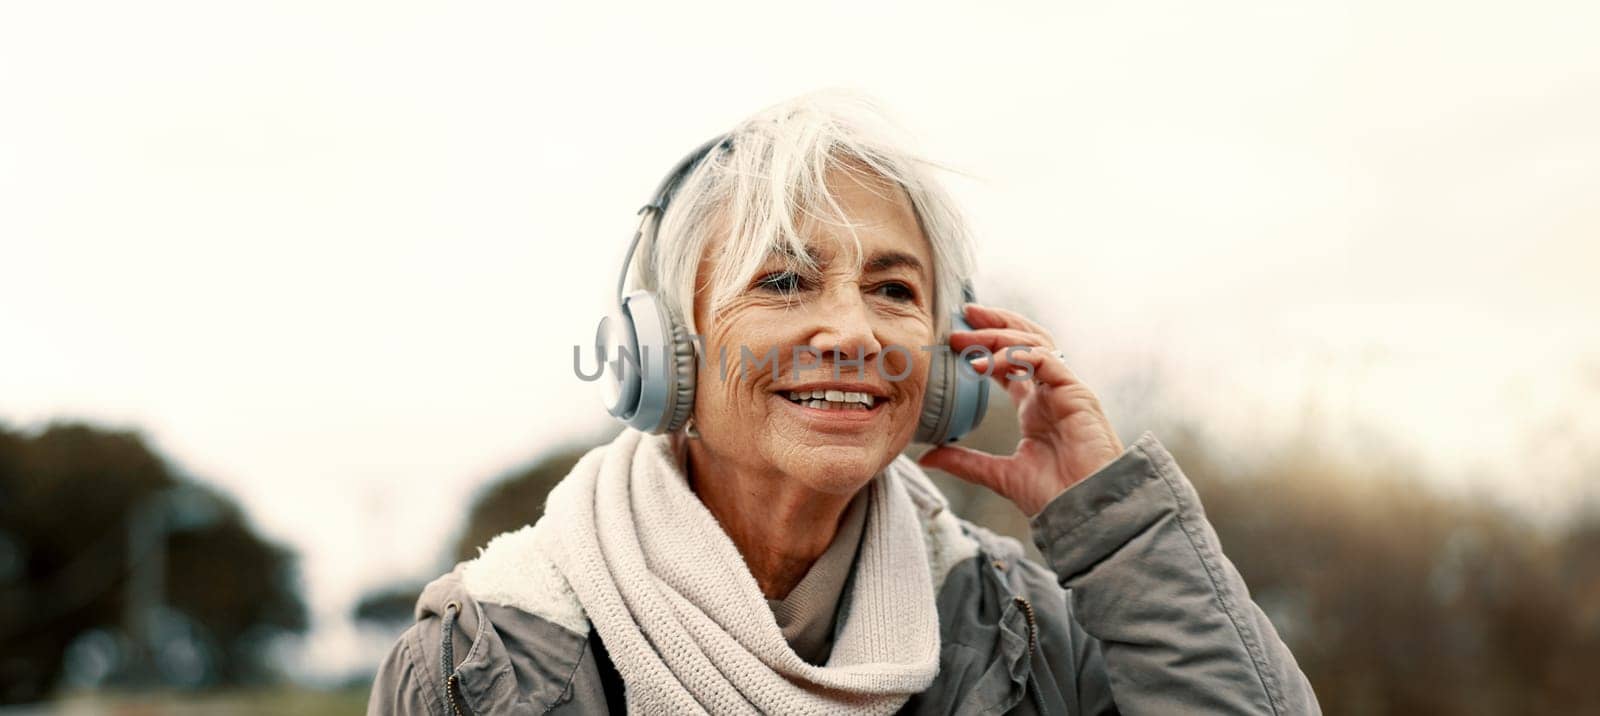 Old woman, headphones and listening to music outdoor, walking and wellness with audio streaming and energy. Podcast, radio and sound with female person on city bridge, exercise and travel with tech by YuriArcurs